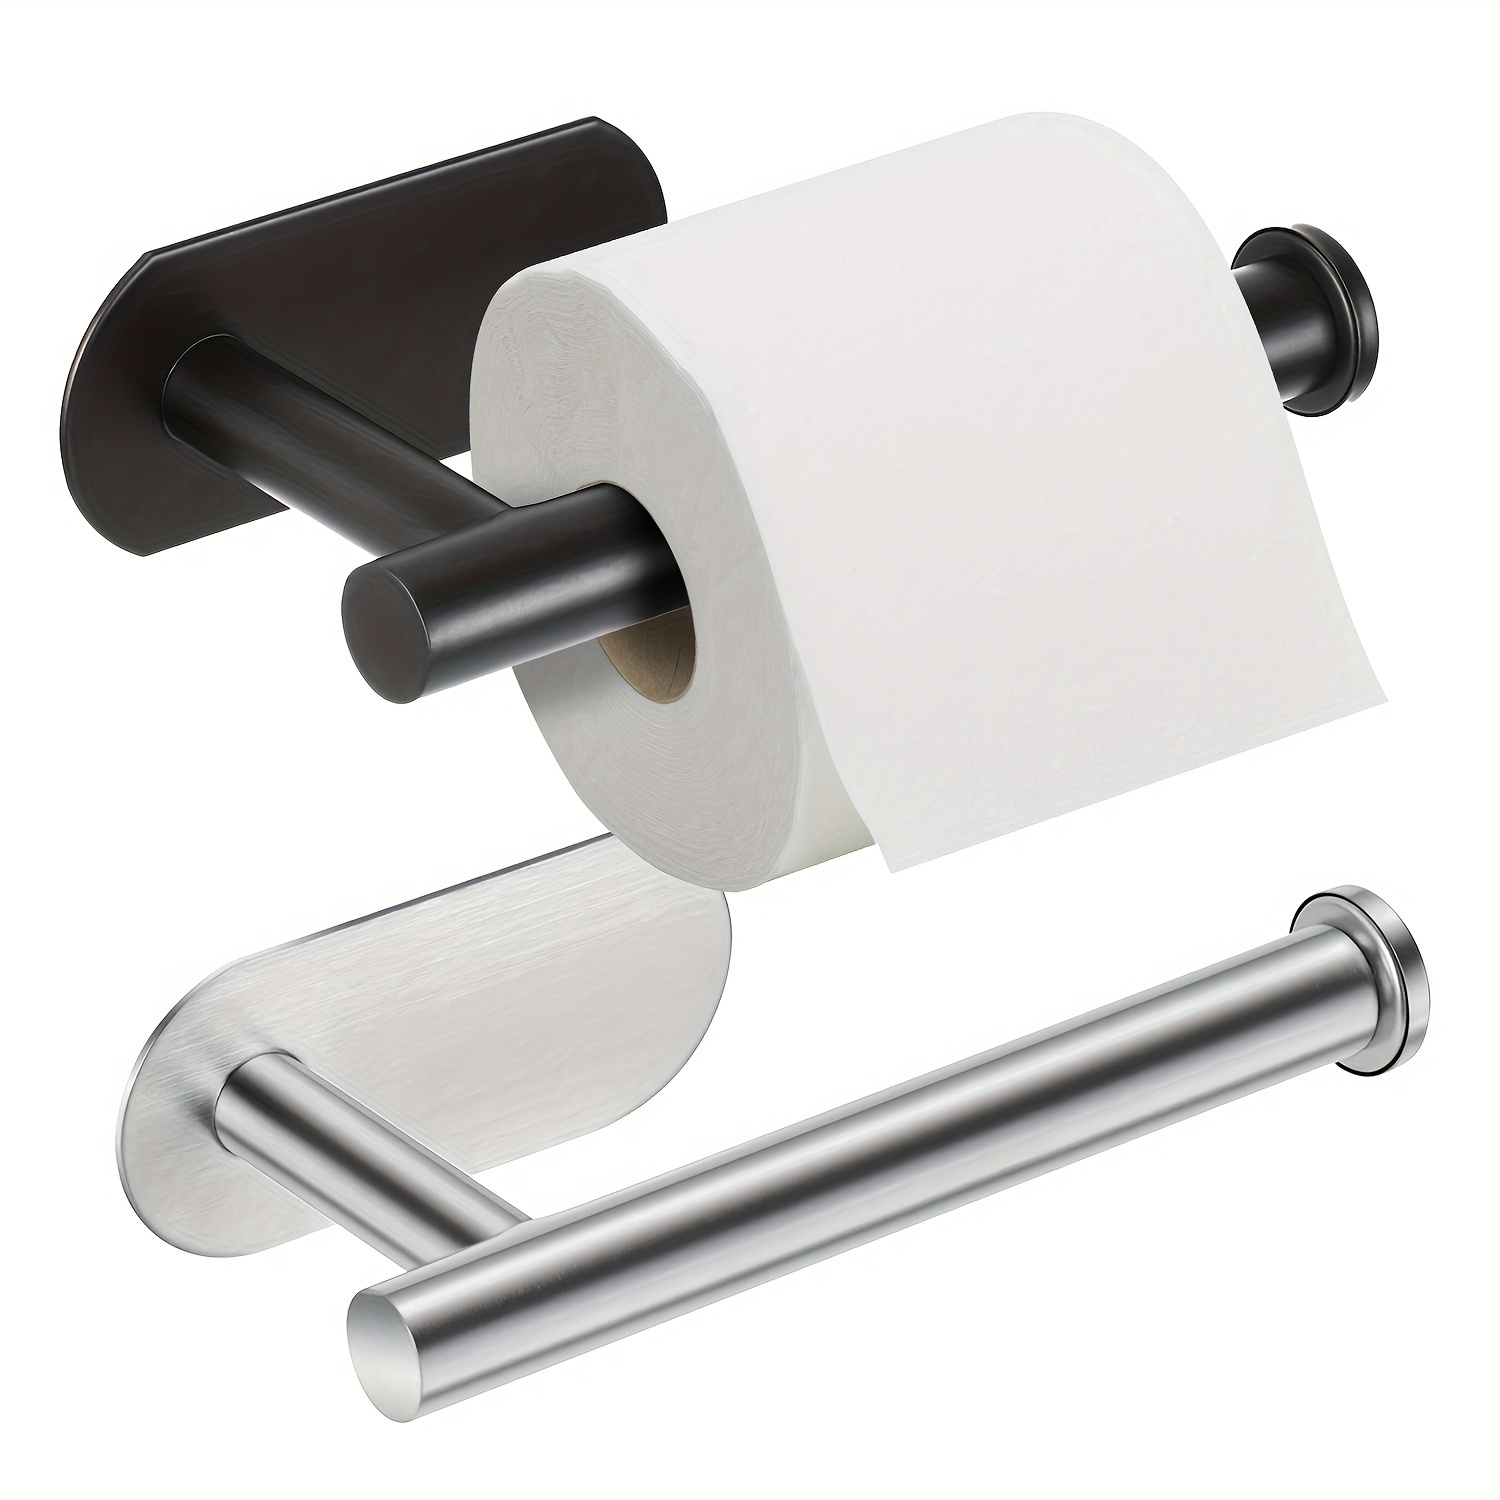 YIGII Adhesive Toilet Paper Holder - MST001 Self Adhesive Toilet Roll  Holder for Bathroom Kitchen Stick on Wall Stainless Steel Brushed